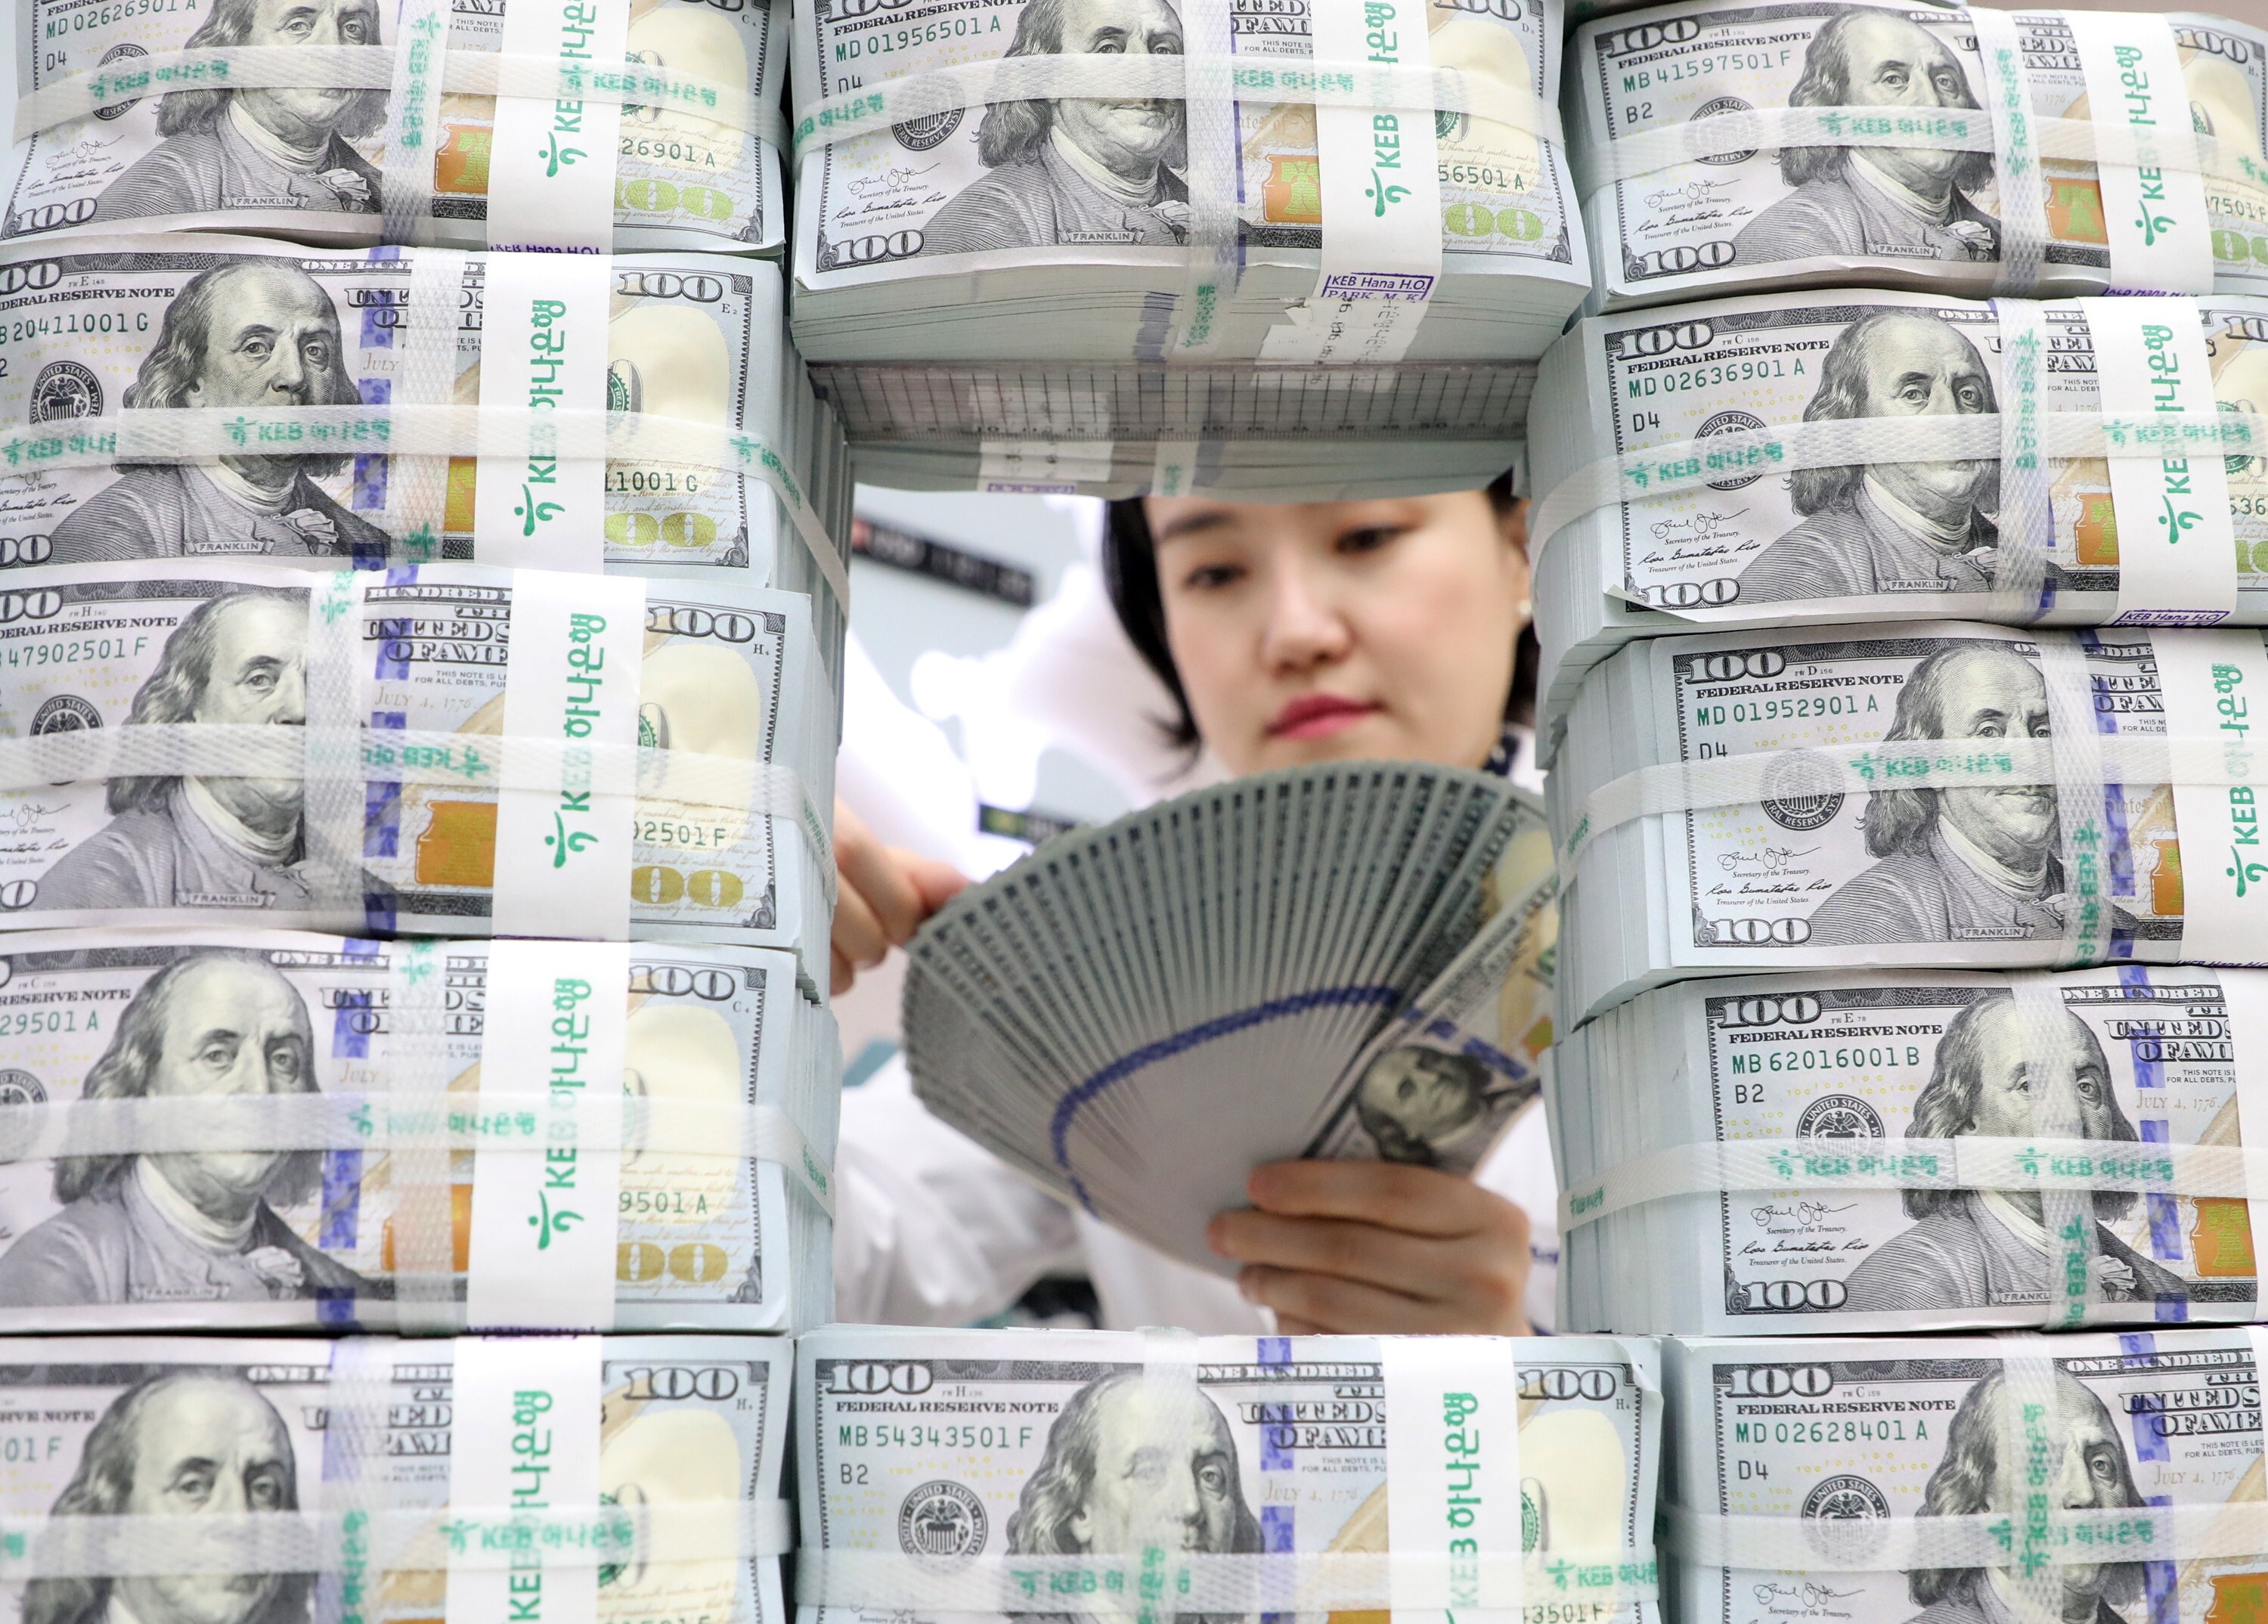 China’s foreign exchange deposits hit a historic high of US$1.01 trillion at end of May, up 35.7 per cent from a year earlier, after having surpassed US$1 trillion for the first time in April, according to data from the People’s Bank of China (PBOC). Photo: EPA-EFE